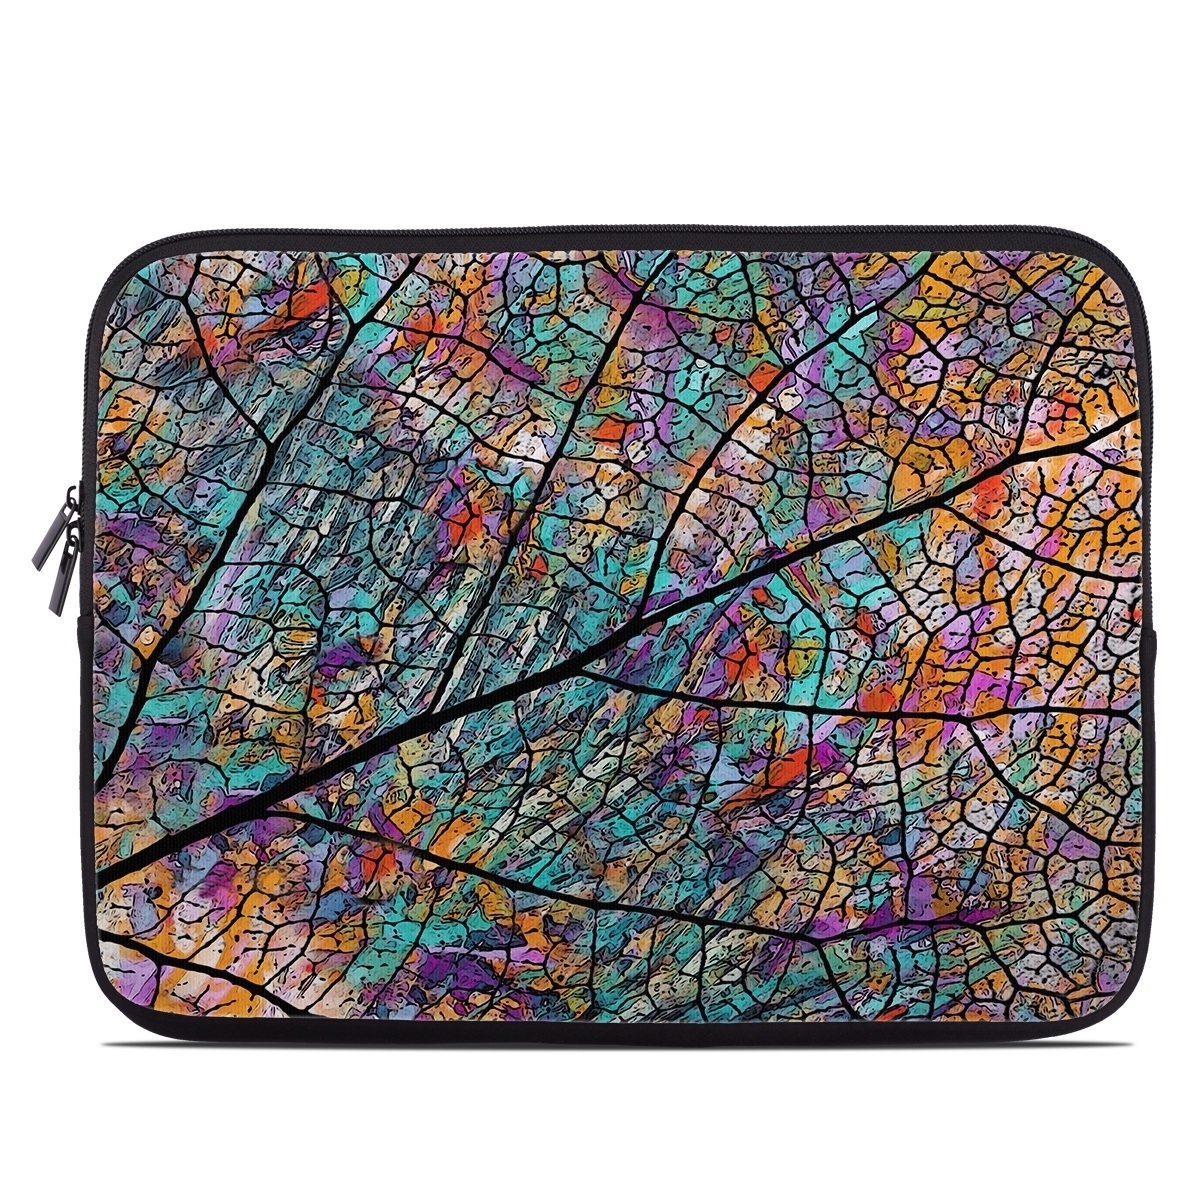 Laptop Sleeve - Stained Aspen (Image 1)